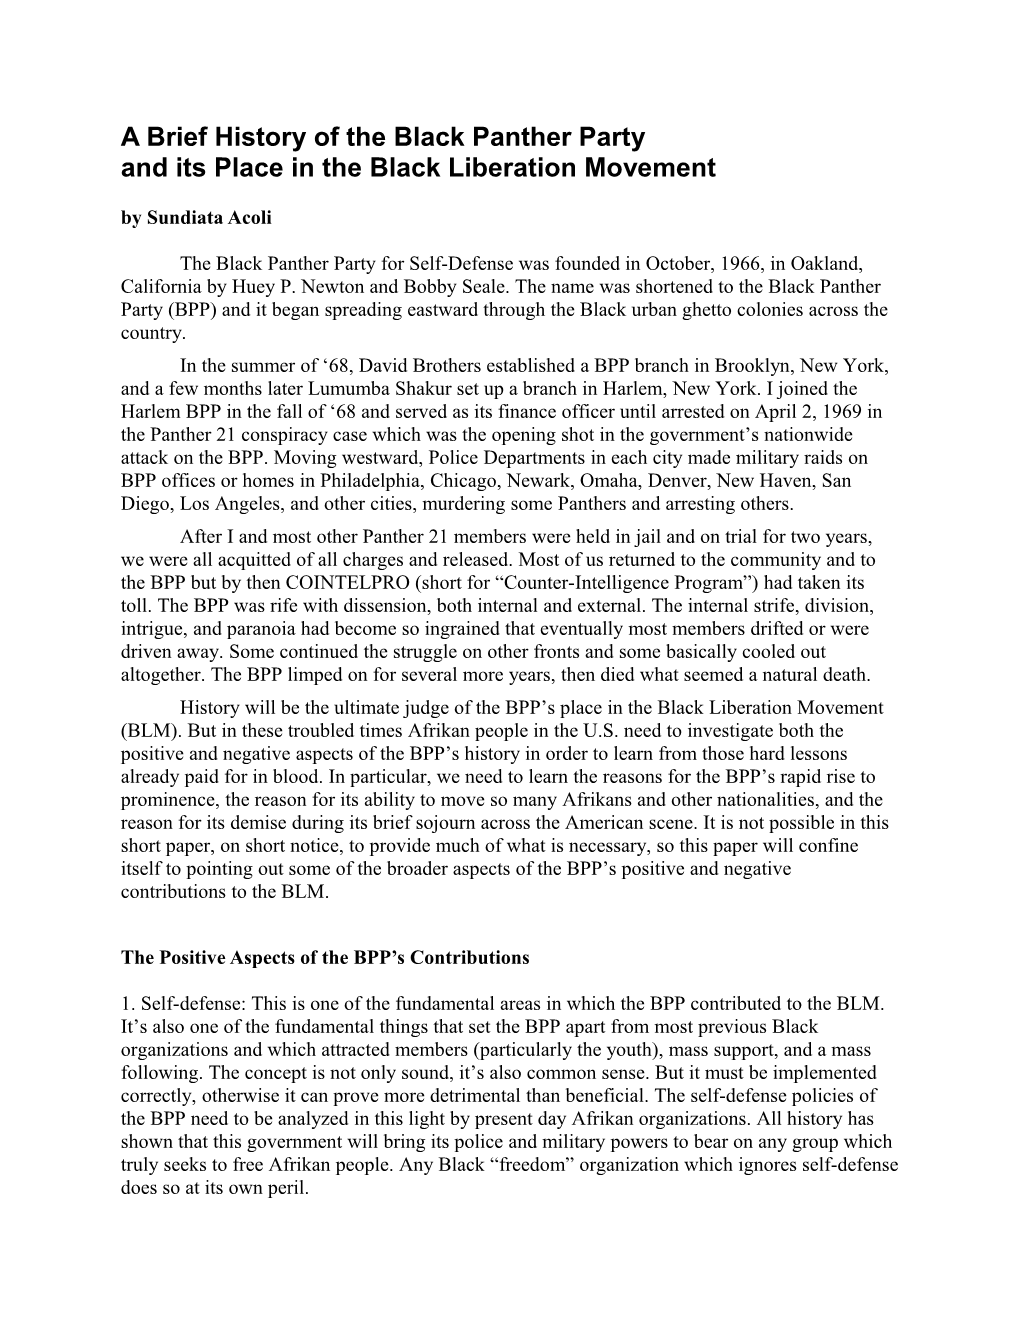 A Brief History of the Black Panther Party and Its Place in the Black Liberation Movement by Sundiata Acoli